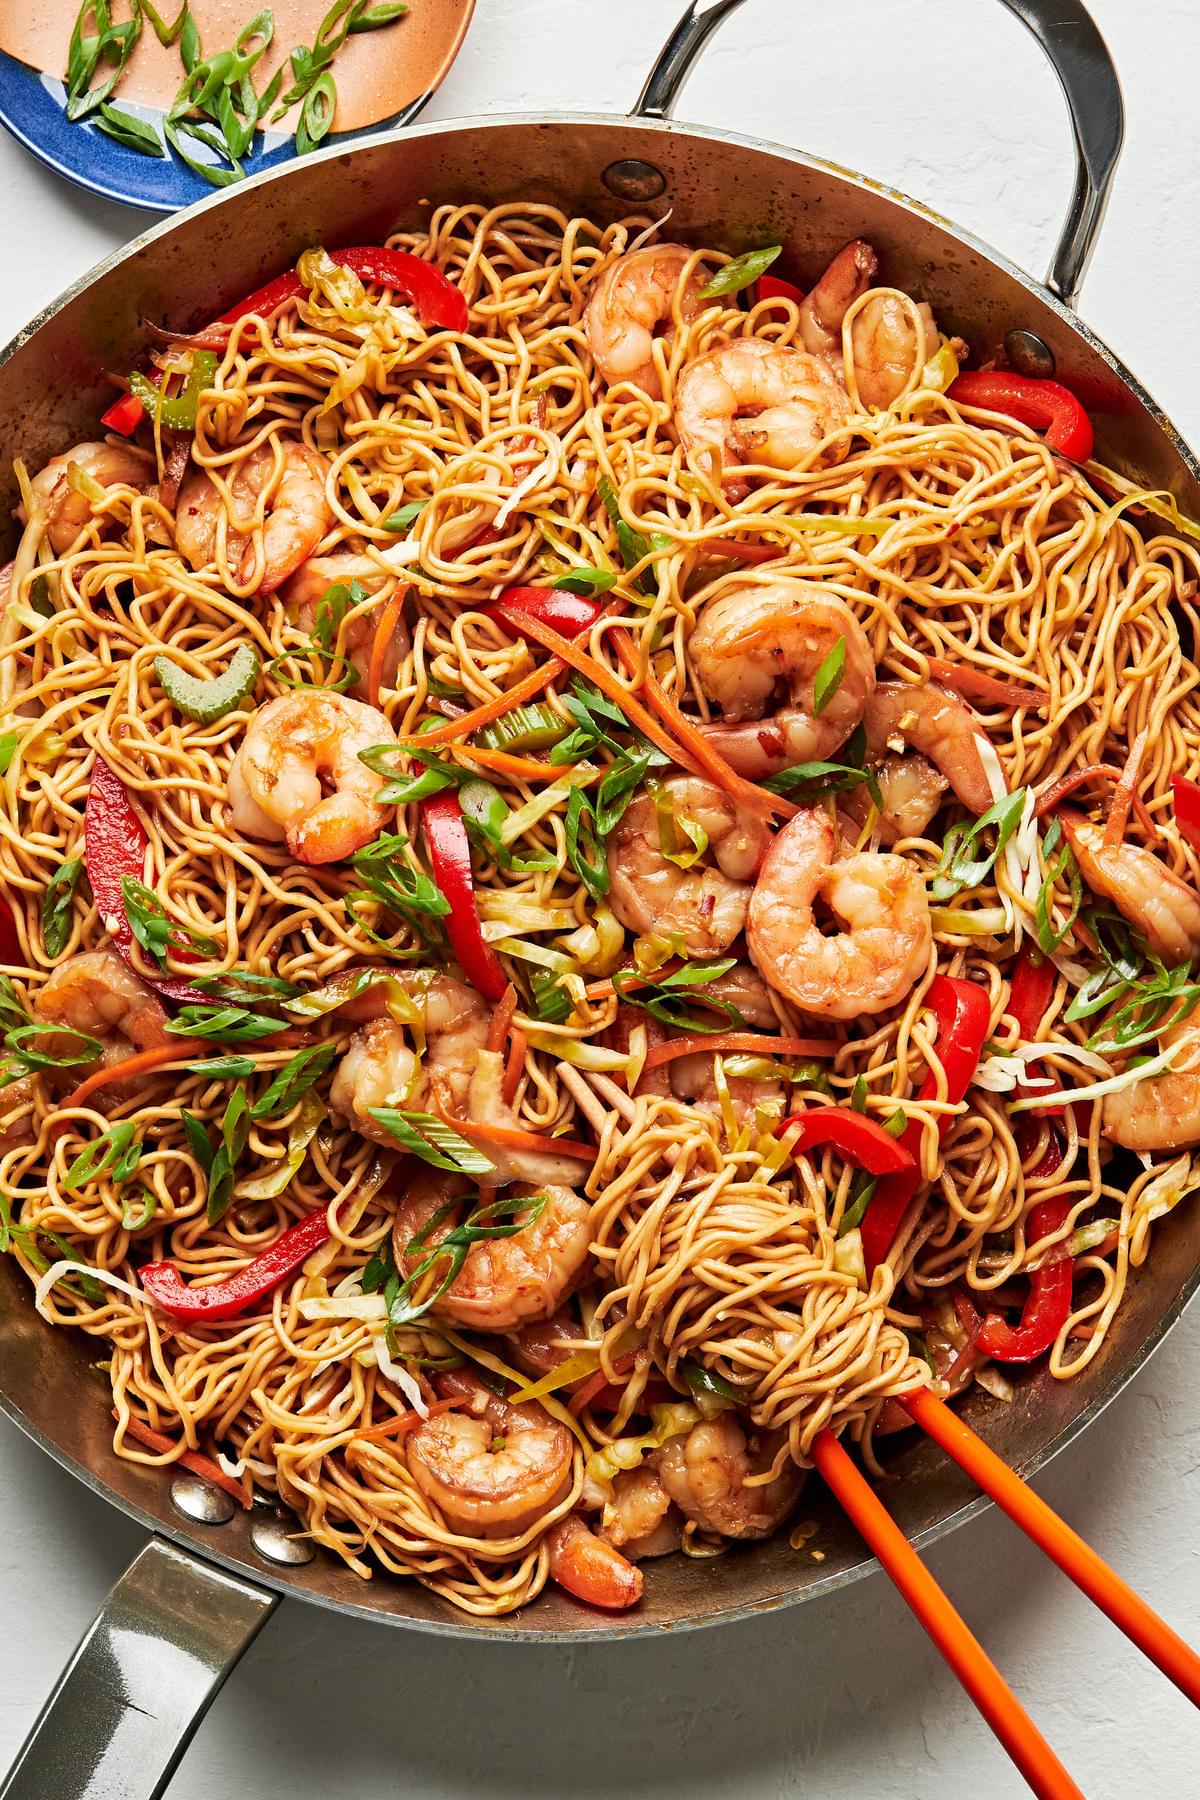 shrimp chow mein made with soy sauce, chili sauce, ginger, garlic, sesame oil & vegetables in a skillet with chopsticks